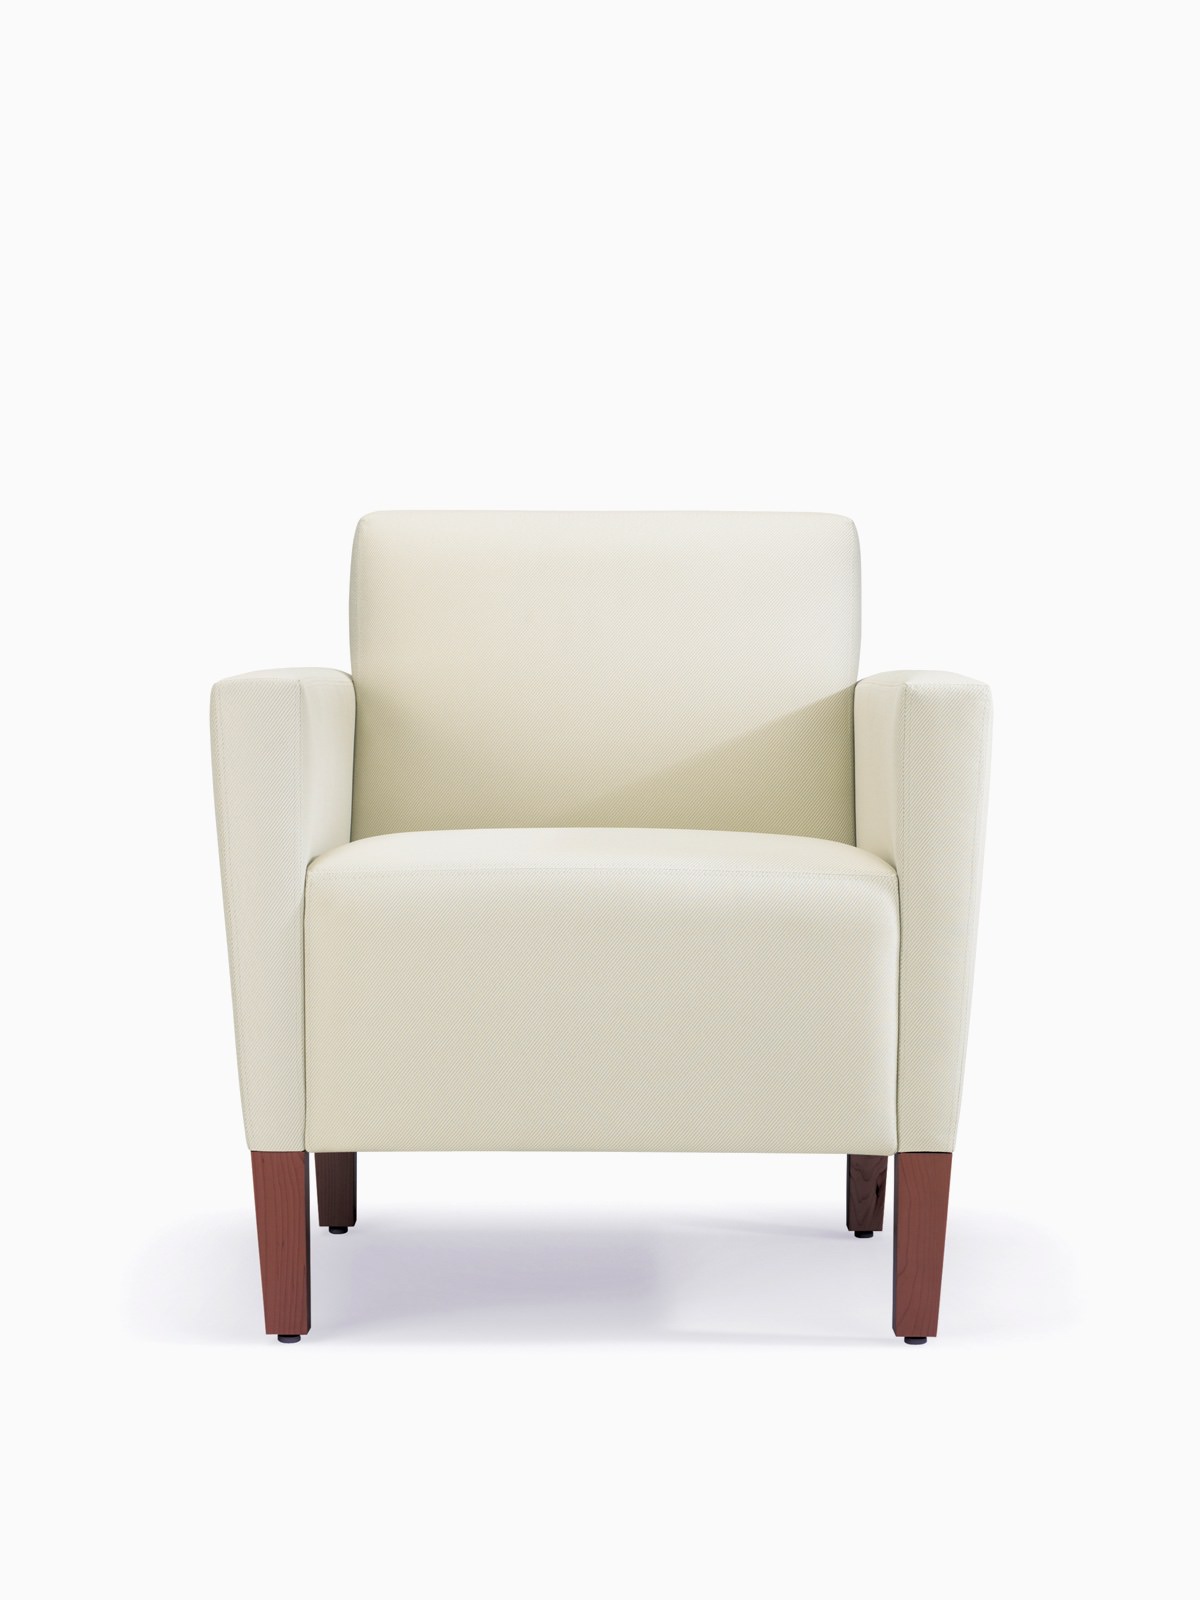 A front view of a Brava Classic Lounge Chair with white textile and upholstered arm caps.